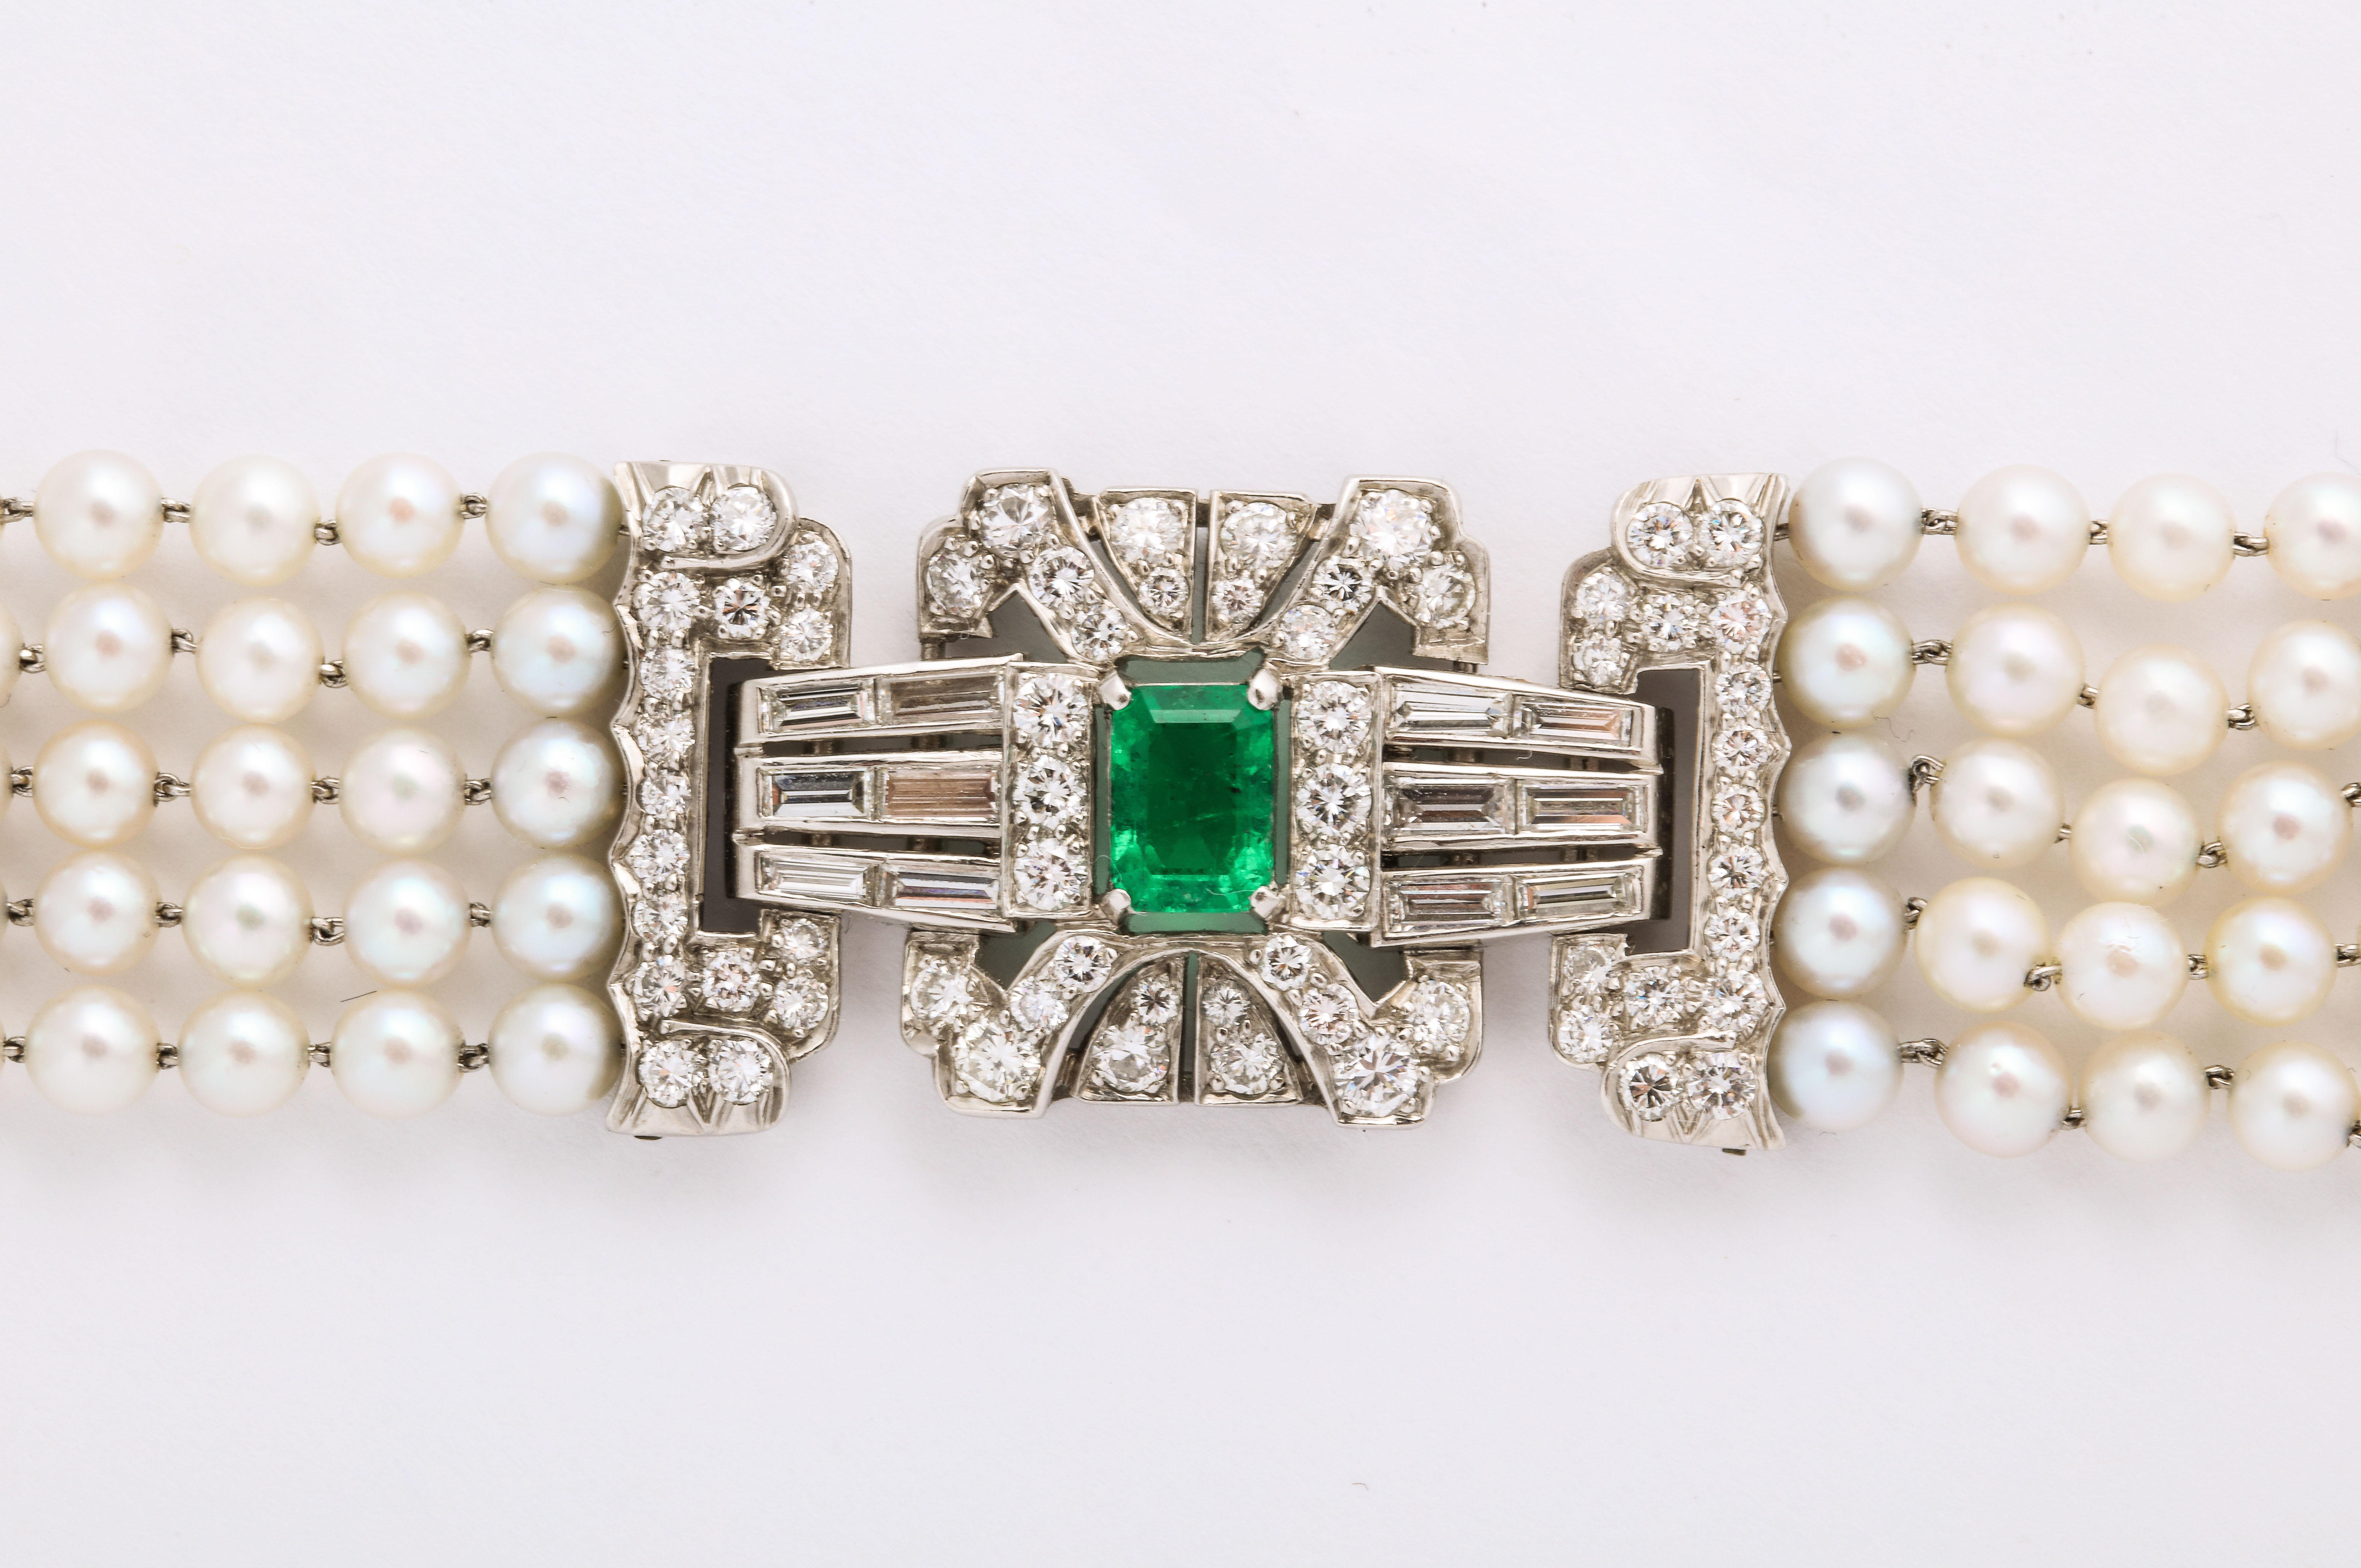 Emerald Diamond Pearl Bracelet in Platinum, unmarked but tested. The diamonds are fine white full cuts and baguettes @ 1 cts tw, and the bracelet measures 7 inches long and 7/8 of an inch wide.

Material:
Platinum 26.5 dwt
Unmarked but